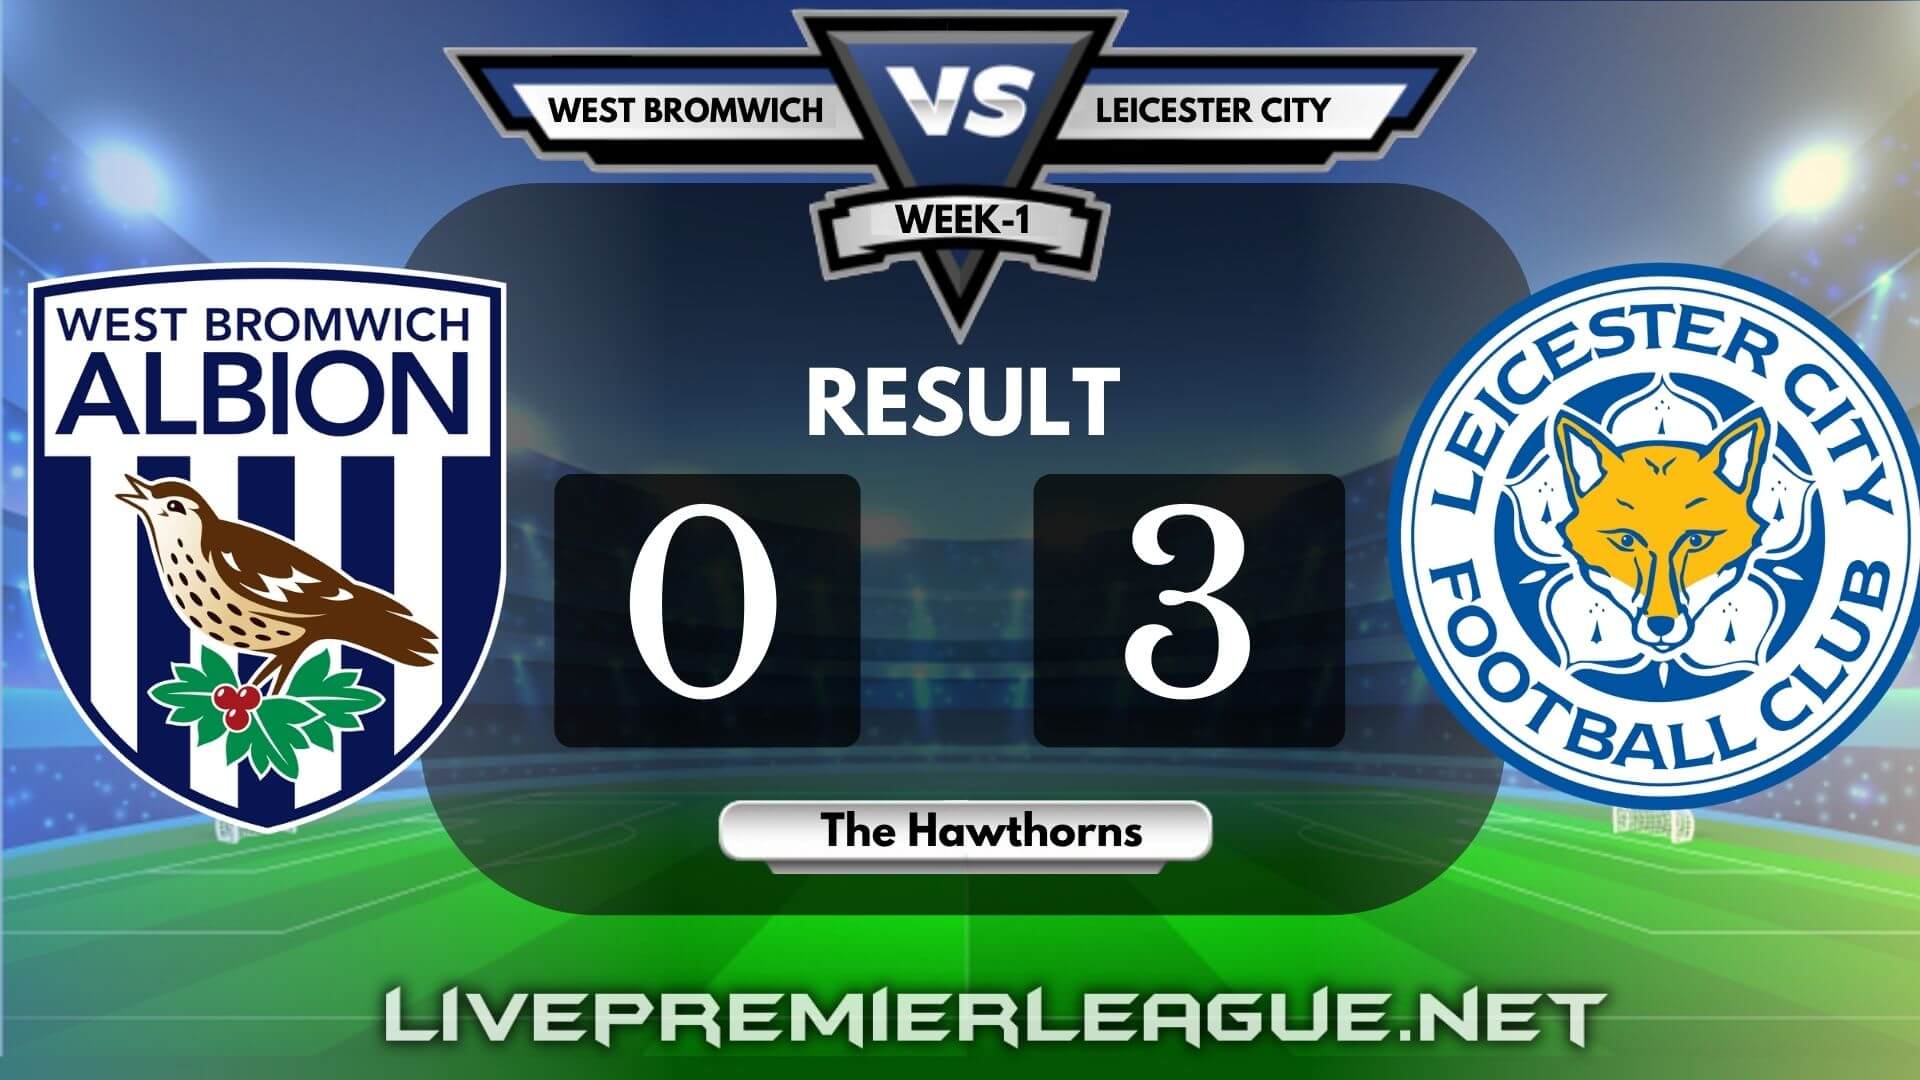 West Bromwich Albion Vs Leicester City | Week 1 Result 2020